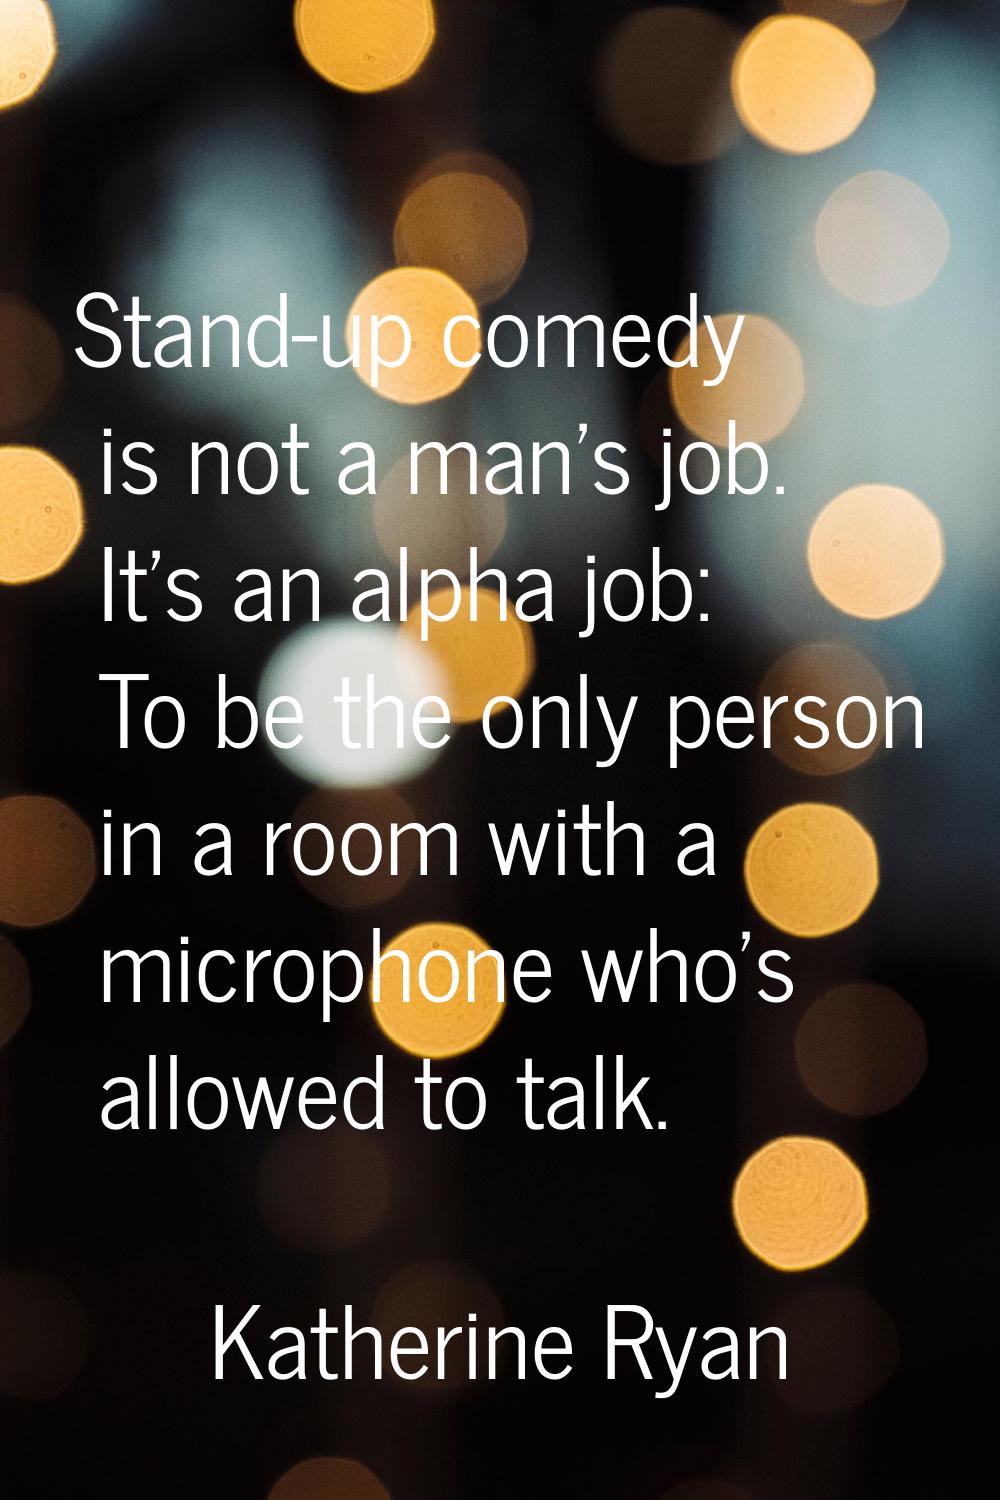 Stand-up comedy is not a man's job. It's an alpha job: To be the only person in a room with a micro